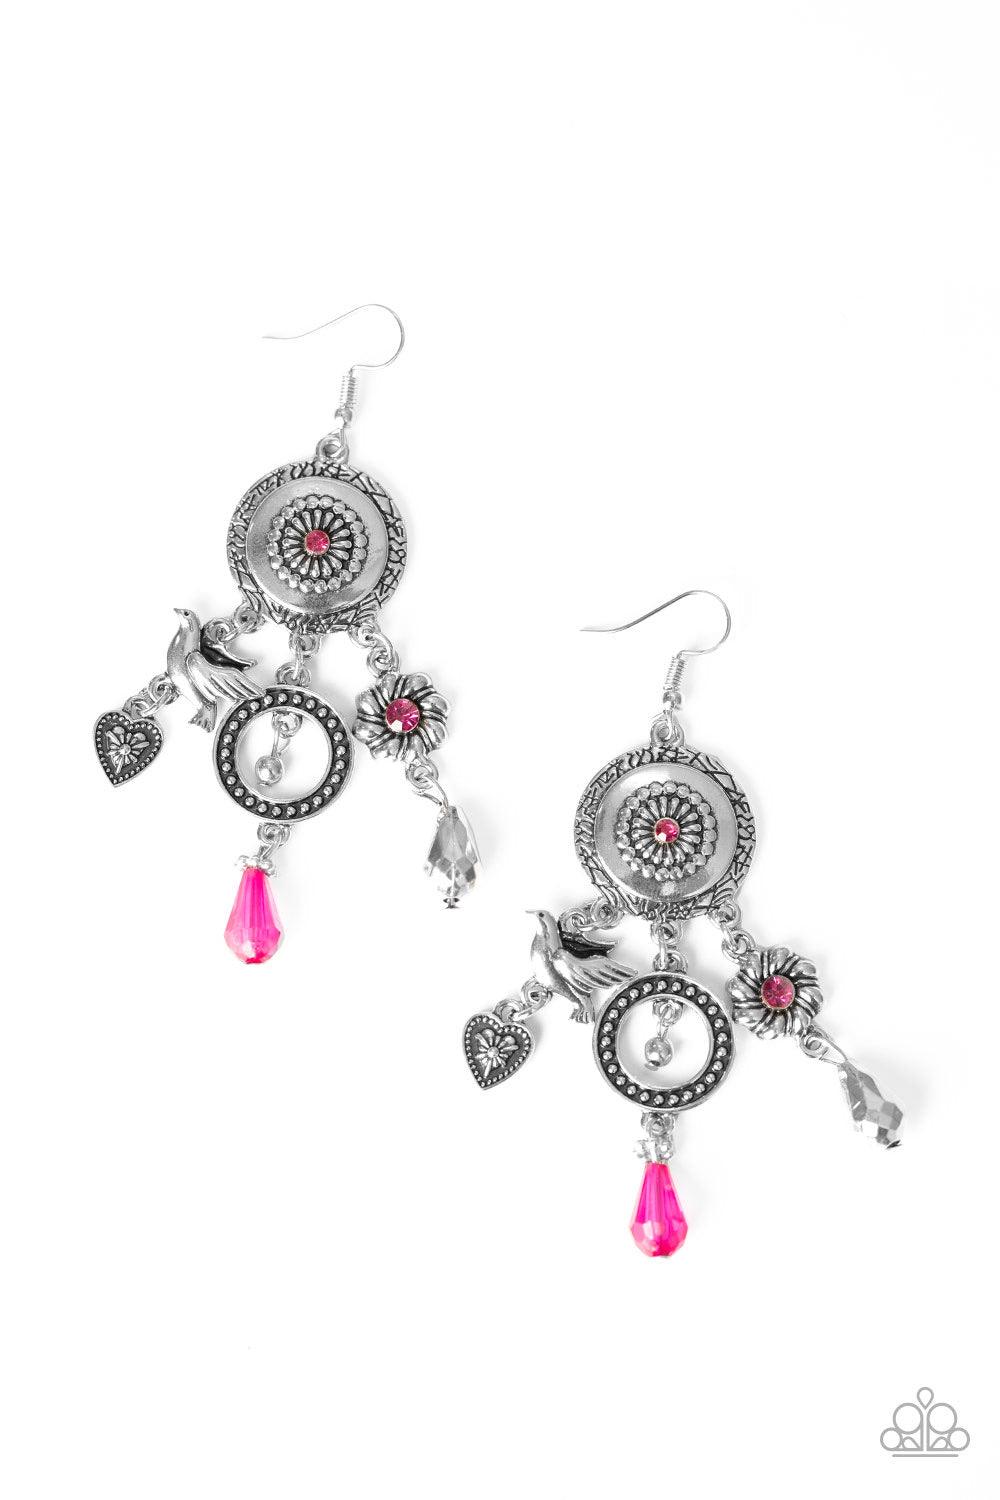 Paparazzi Accessories Springtime Essence - Pink Infused with glittery Pink Peacock rhinestone and crystal-like accents, a whimsical display of silver heart, flower, and bird charms dance from the bottom of a decorative floral silver frame, creating a nois